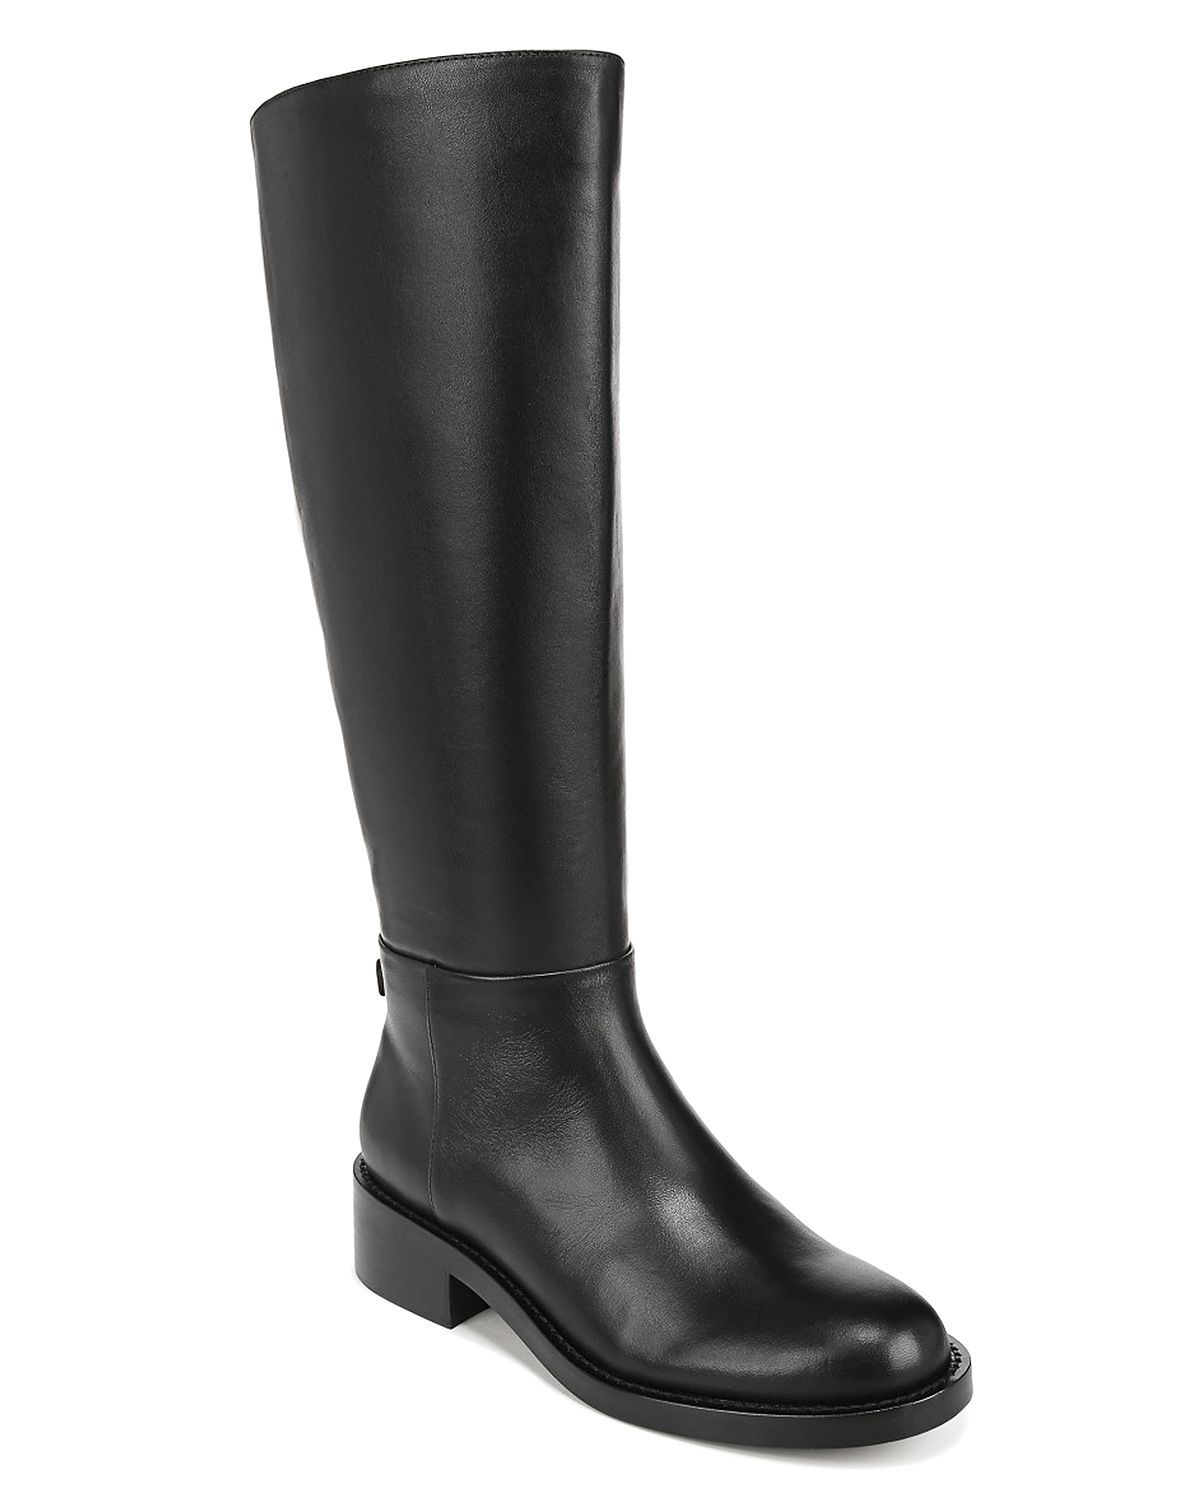 Photo 1 of Women's Mable Wide Calf Riding Boots